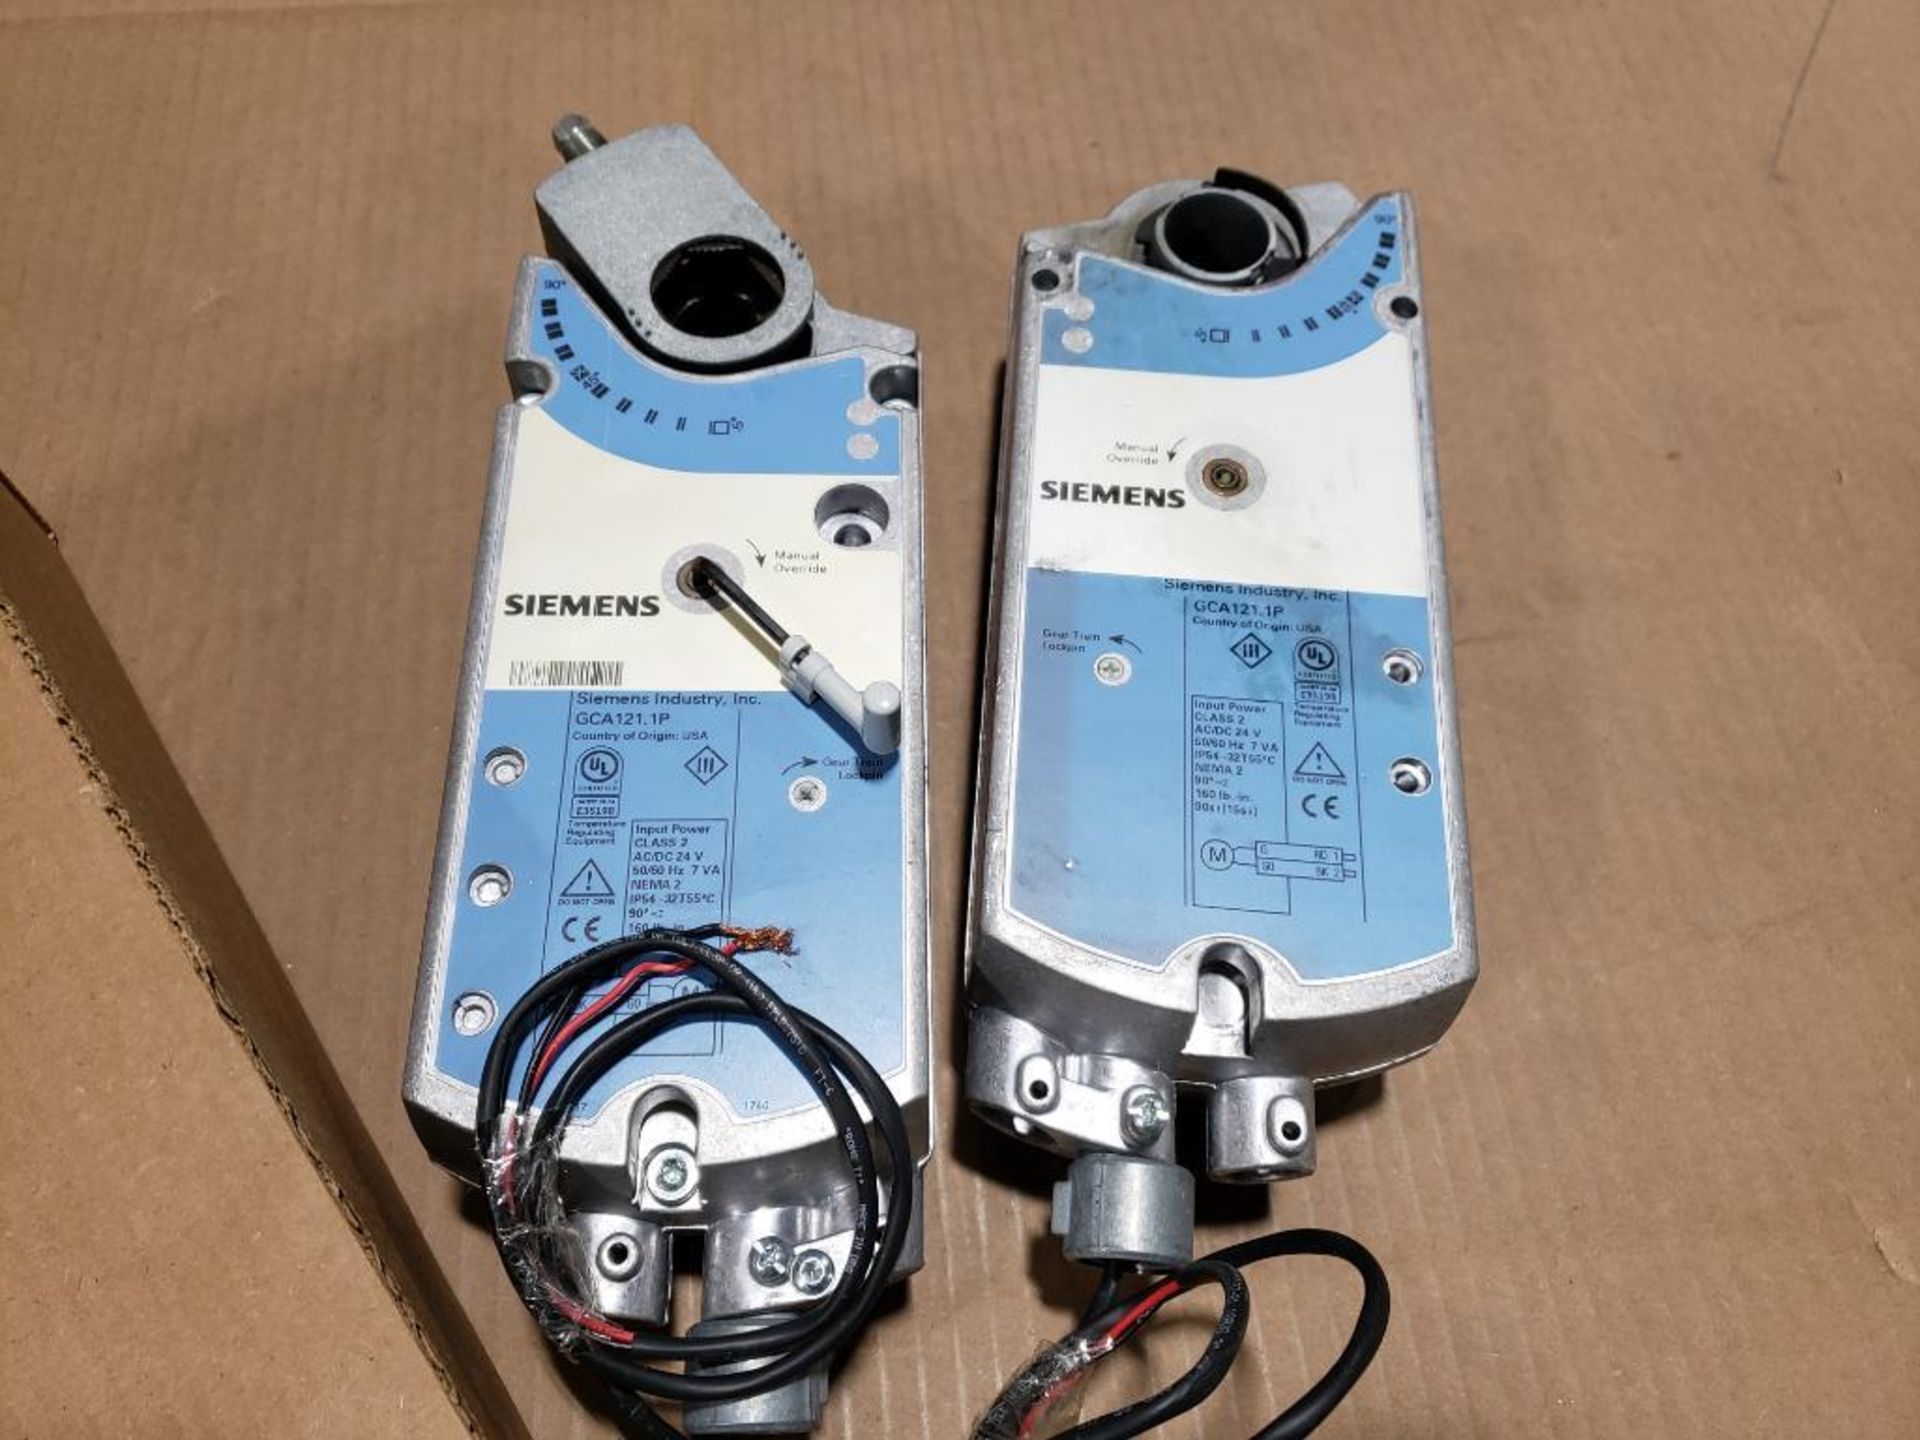 Qty 2 - Siemens actuator. Part number GCA121-1P. - Image 4 of 5